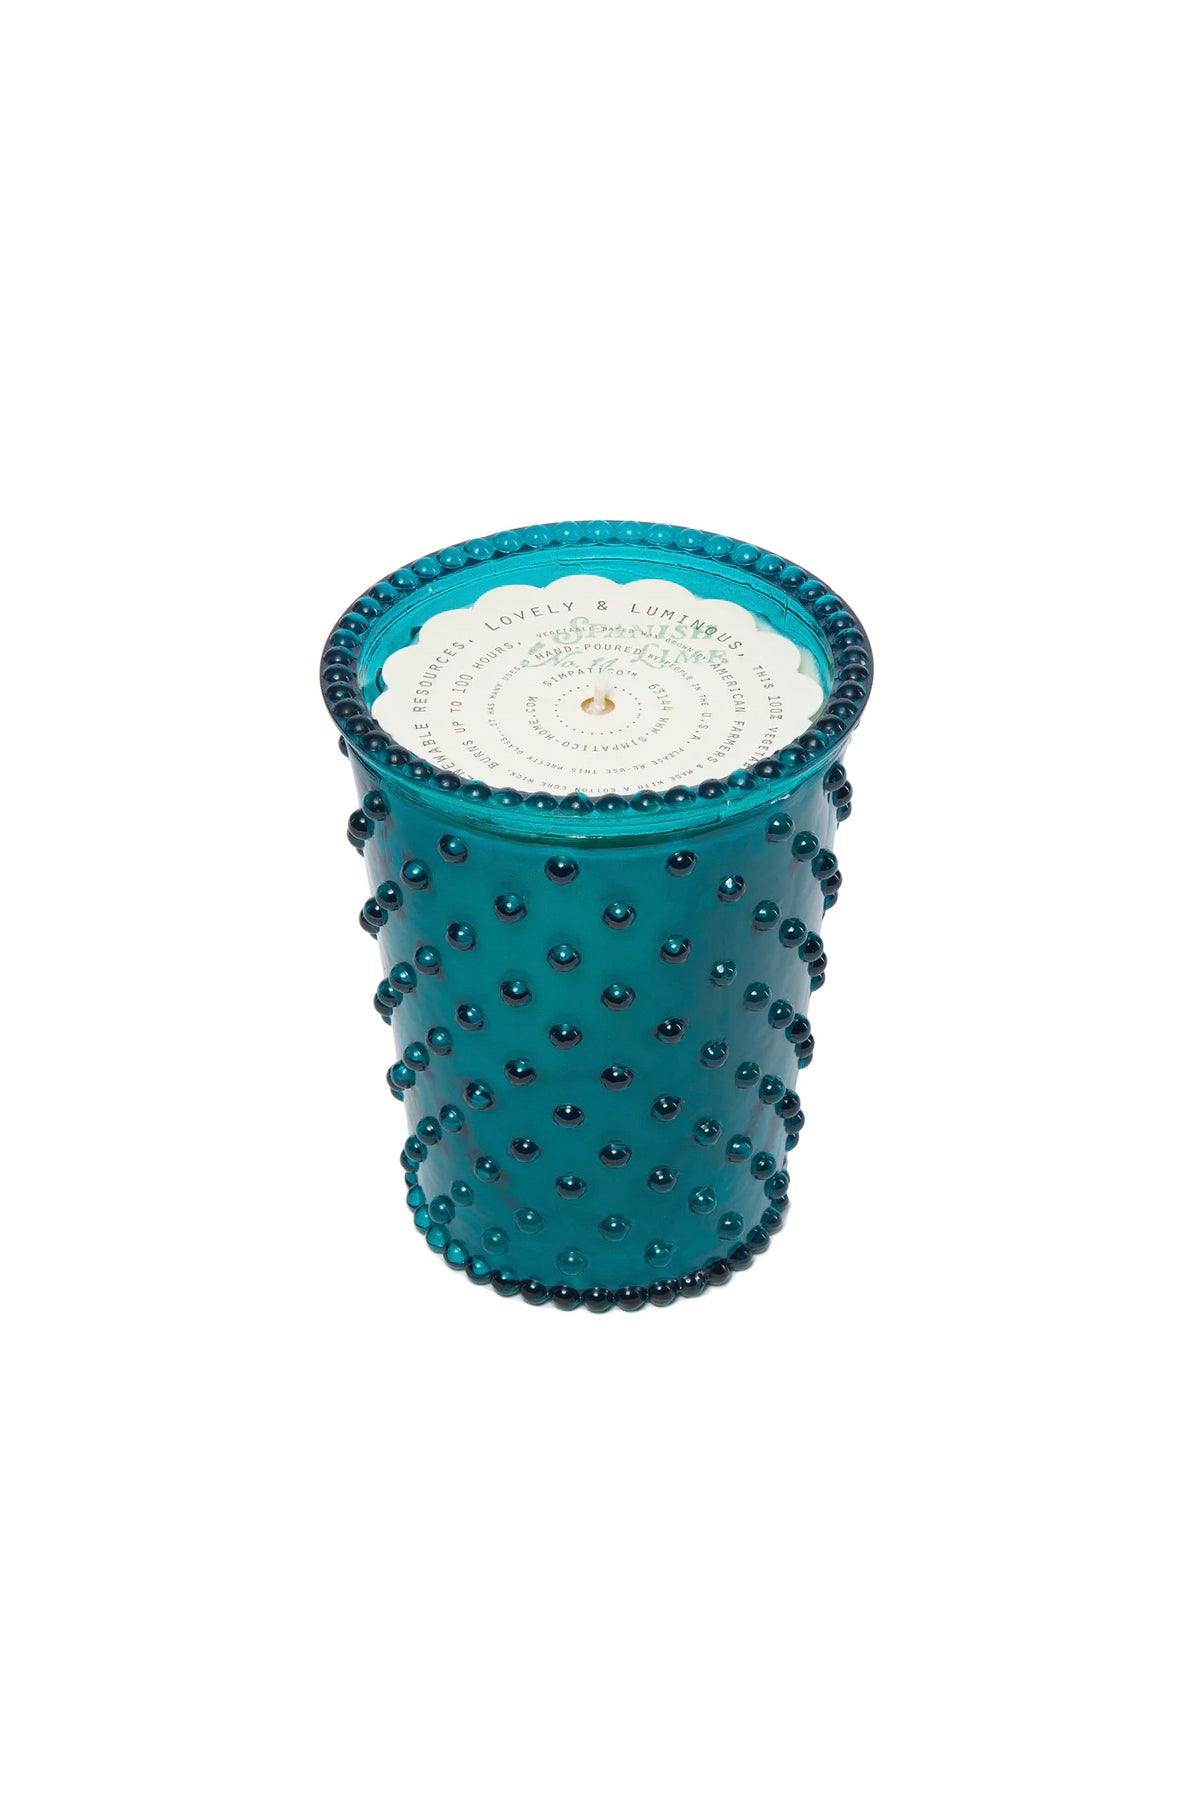 Spanish Lime Hobnail Candle